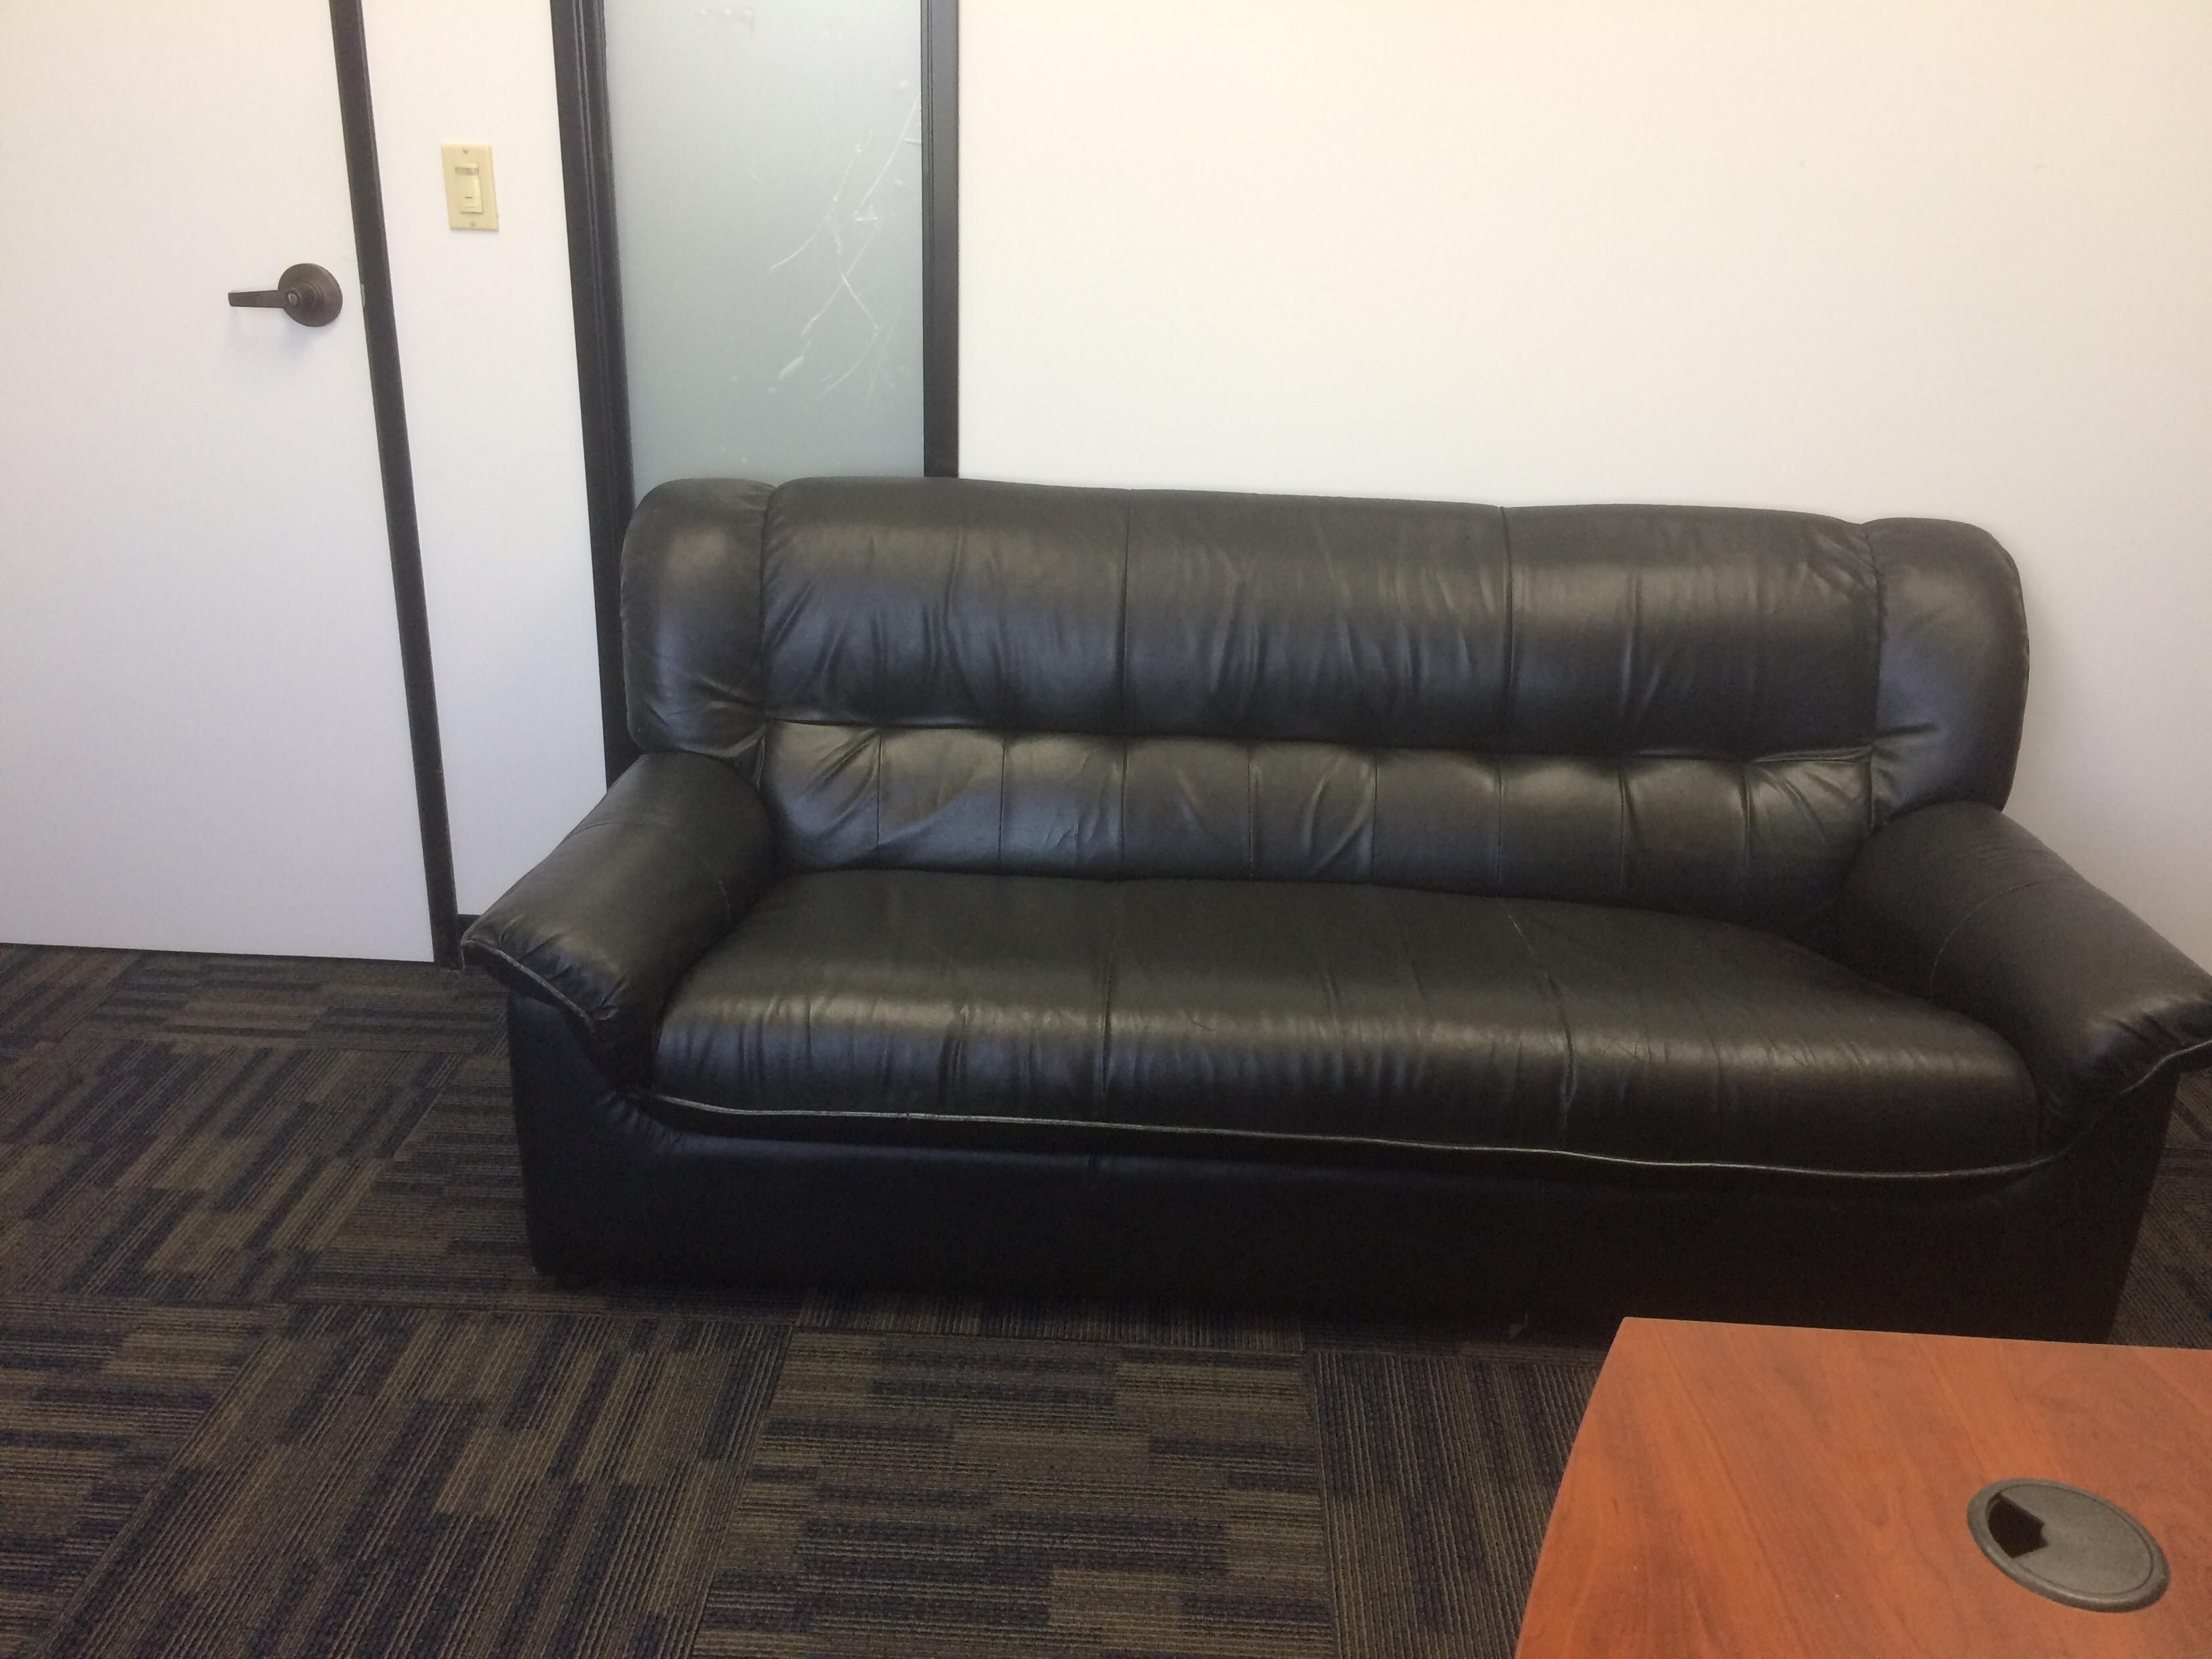 I got a new couch, thinking of doing all the job interviews here.